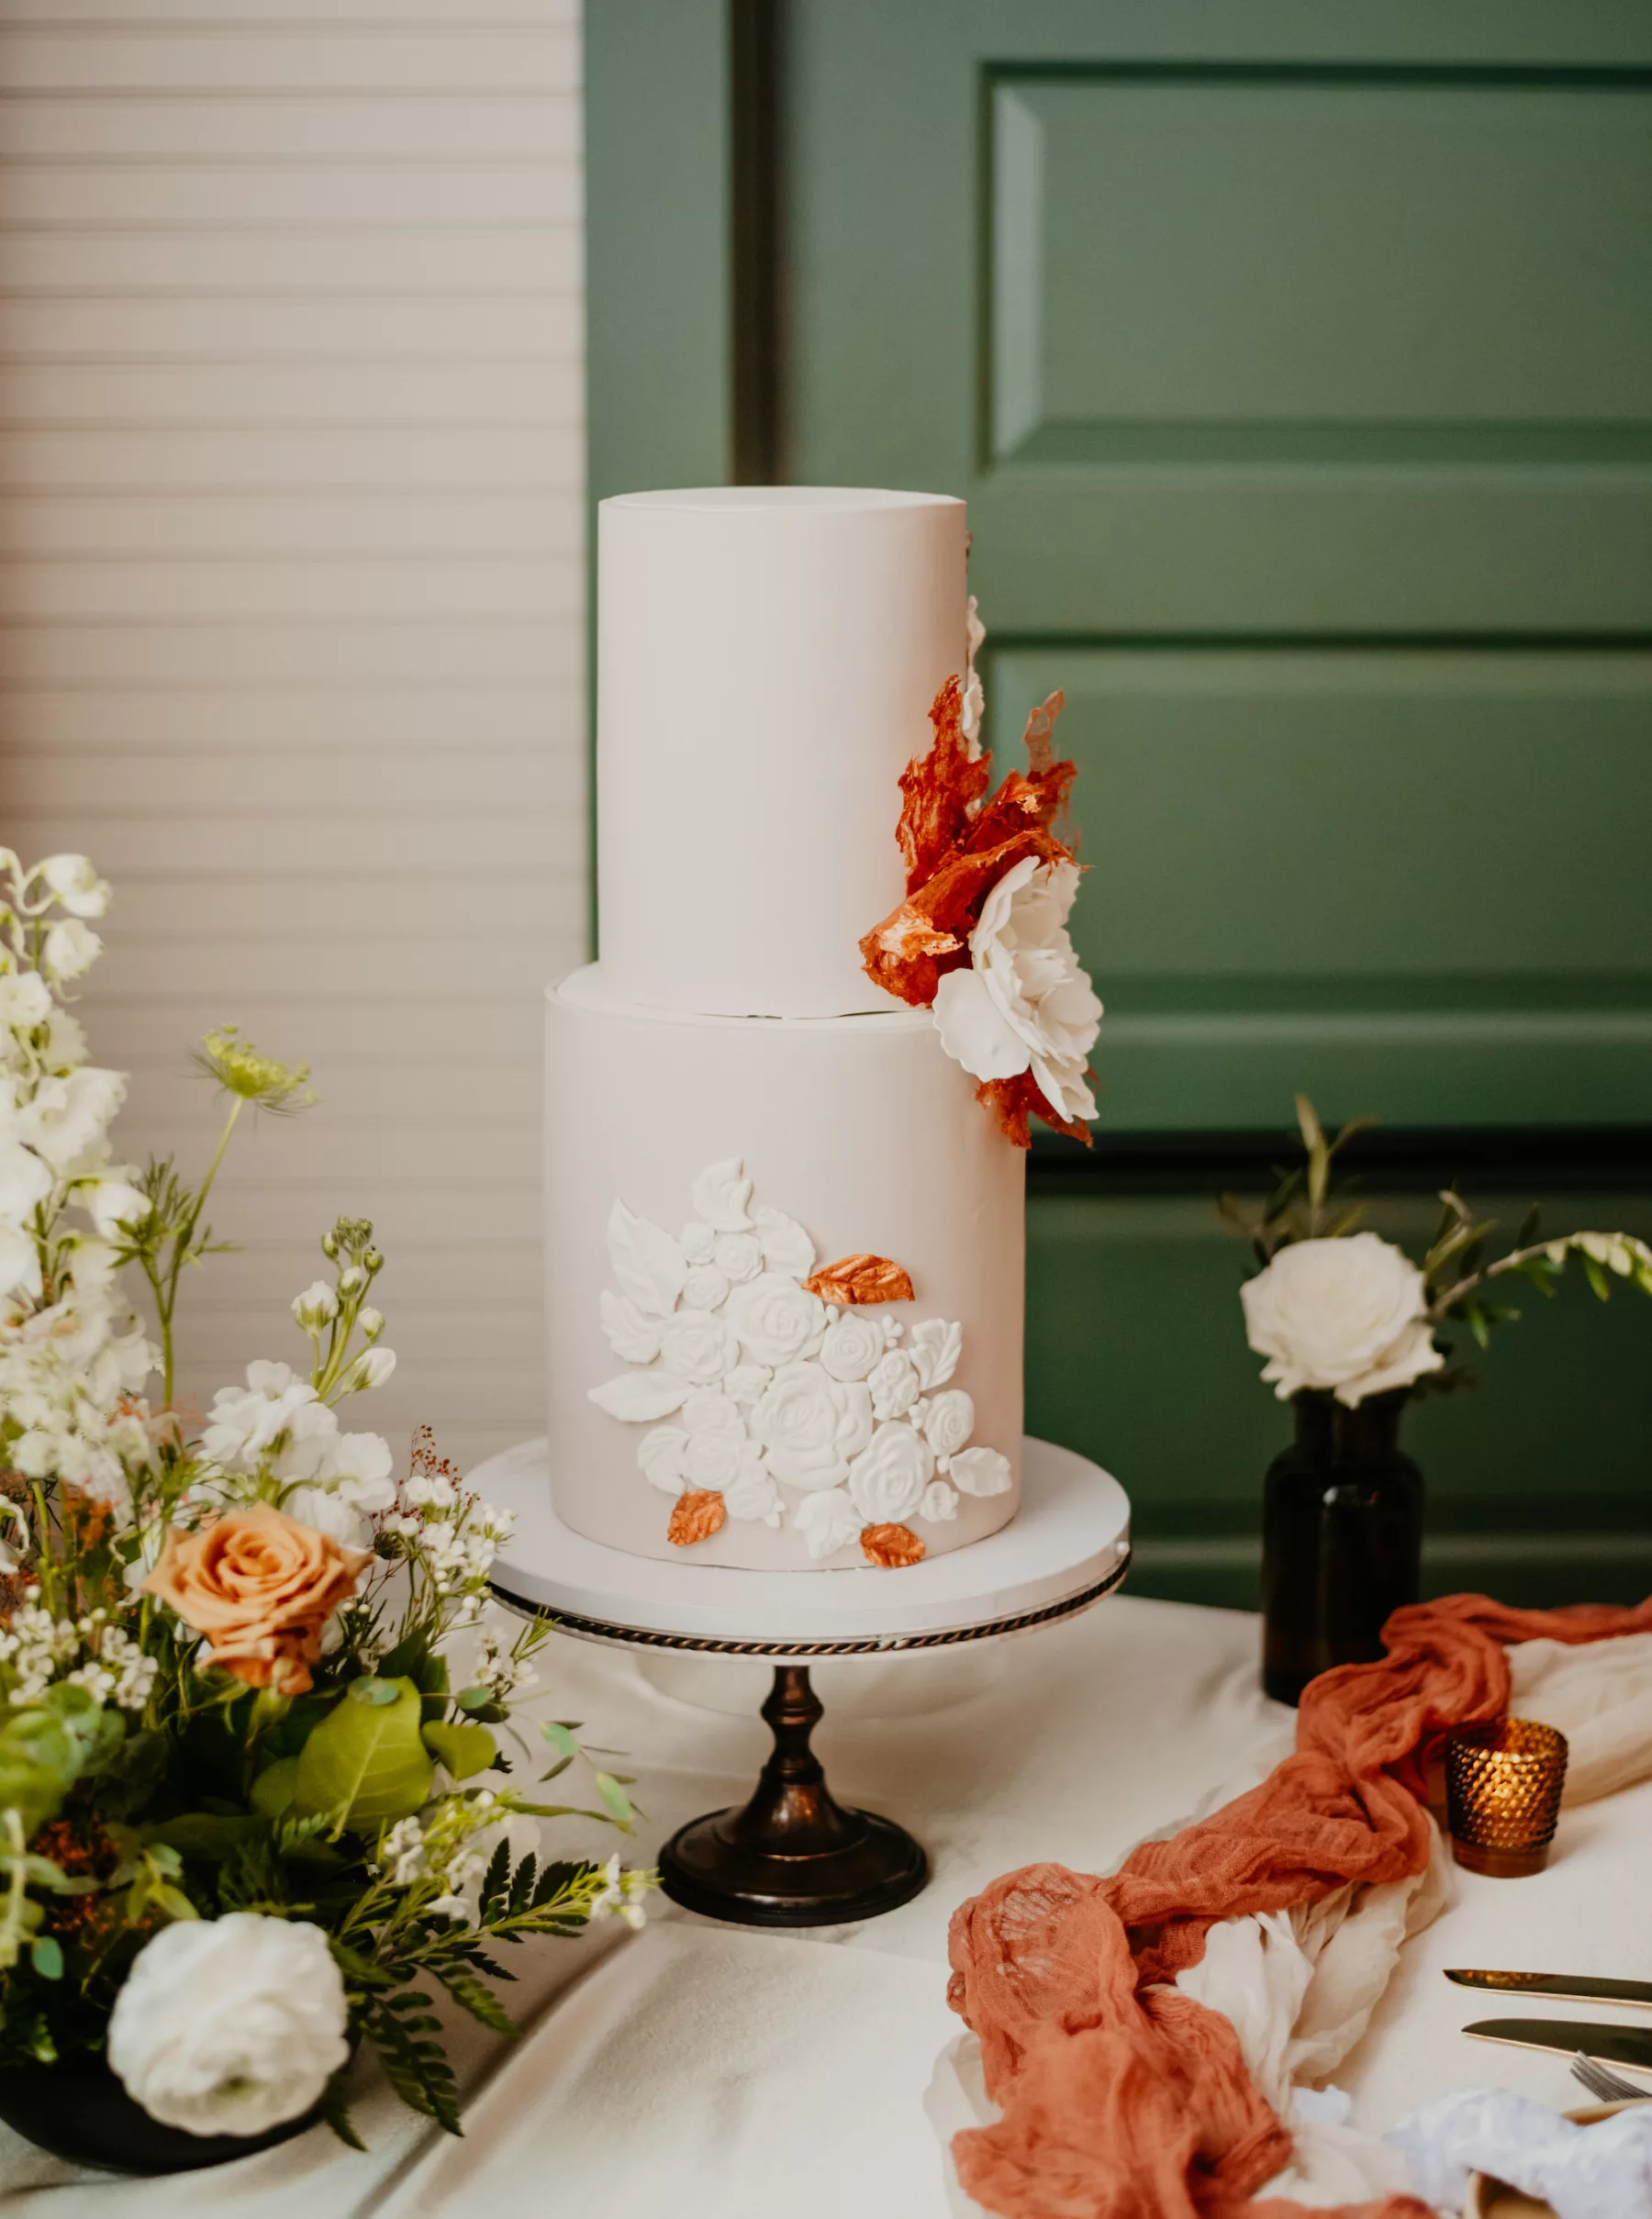 Boho Two-Tiered Round Cake with Fondant White Flowers and Terracotta Rice Paper | Tampa Bay Bakery The Artistic Whisk